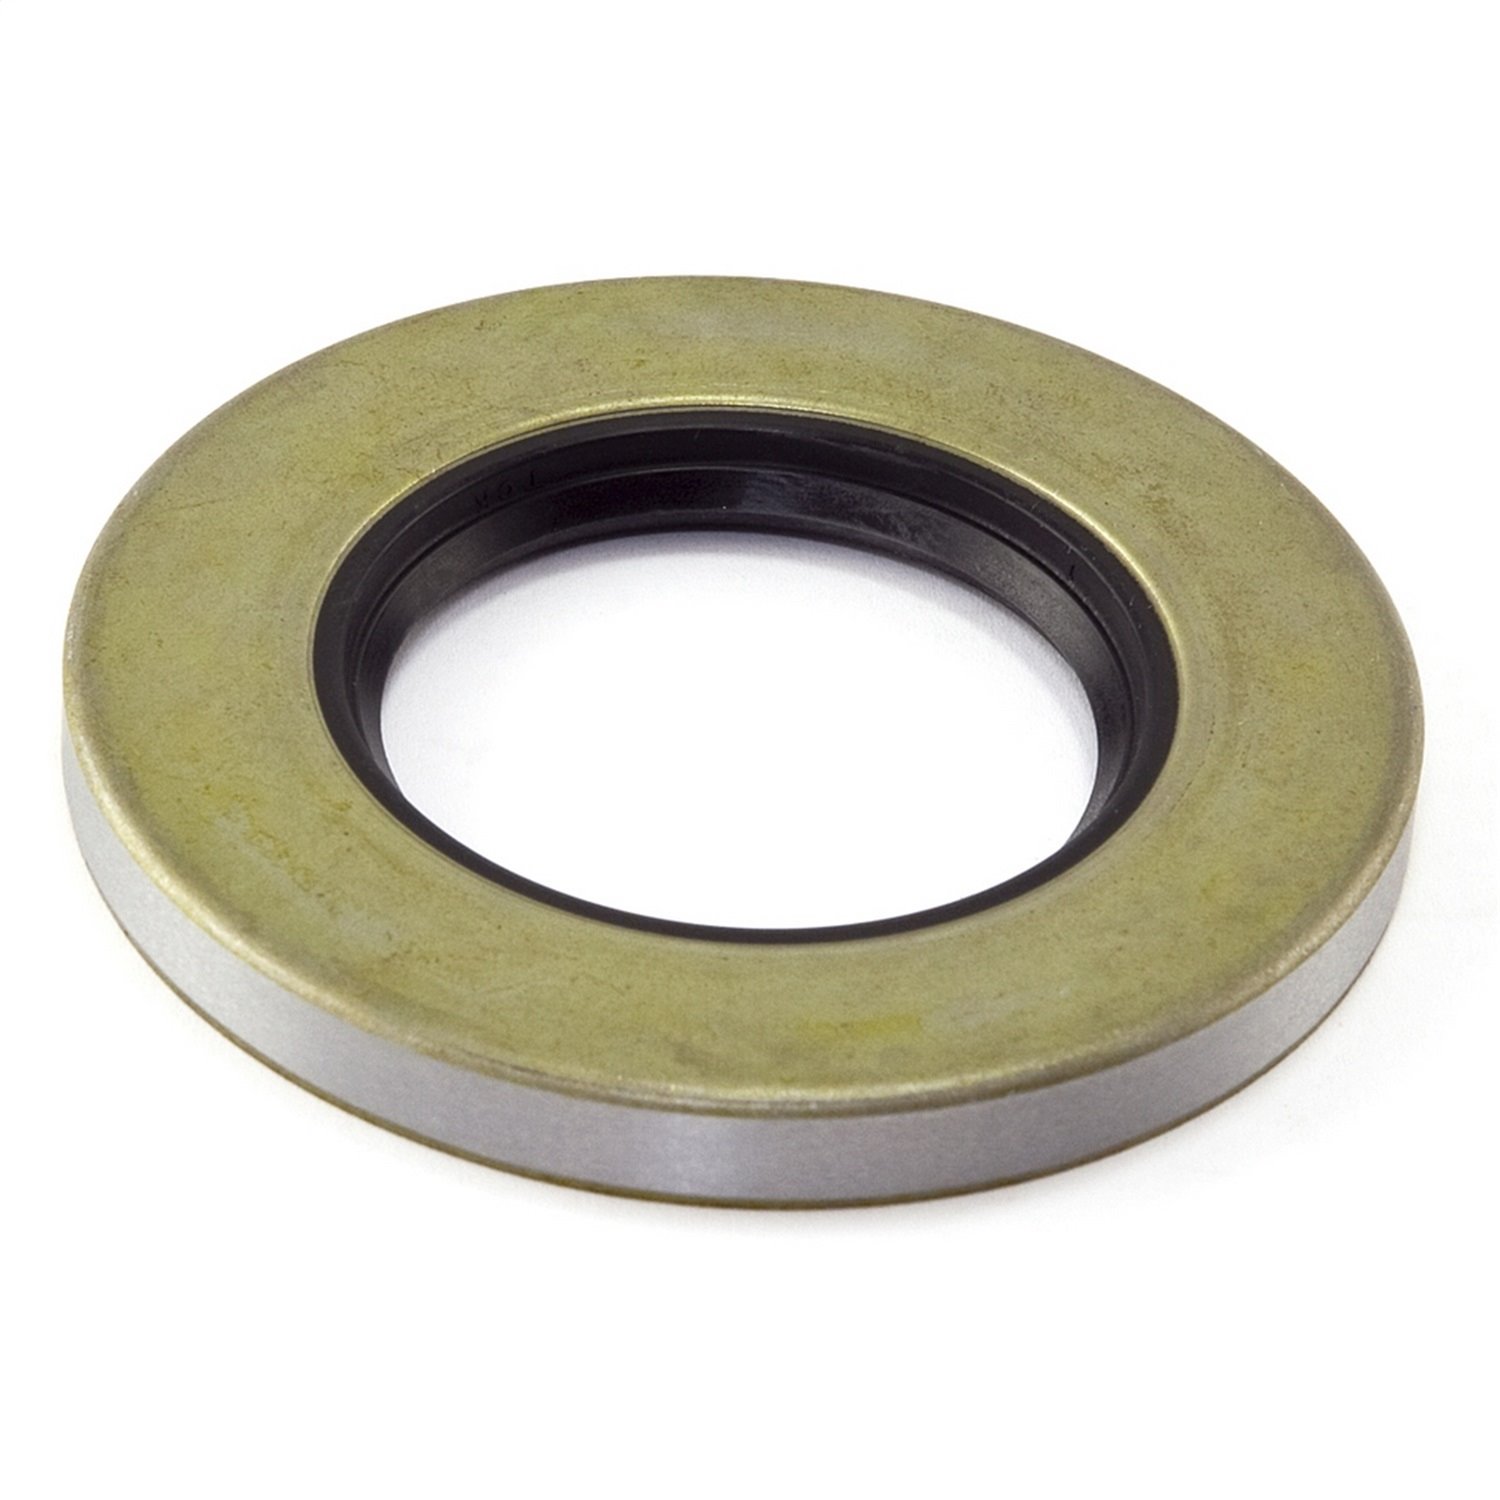 T150 Rear Bearing Retainer Oil Seal 1976-1979 Jeep CJ By Omix-ADA